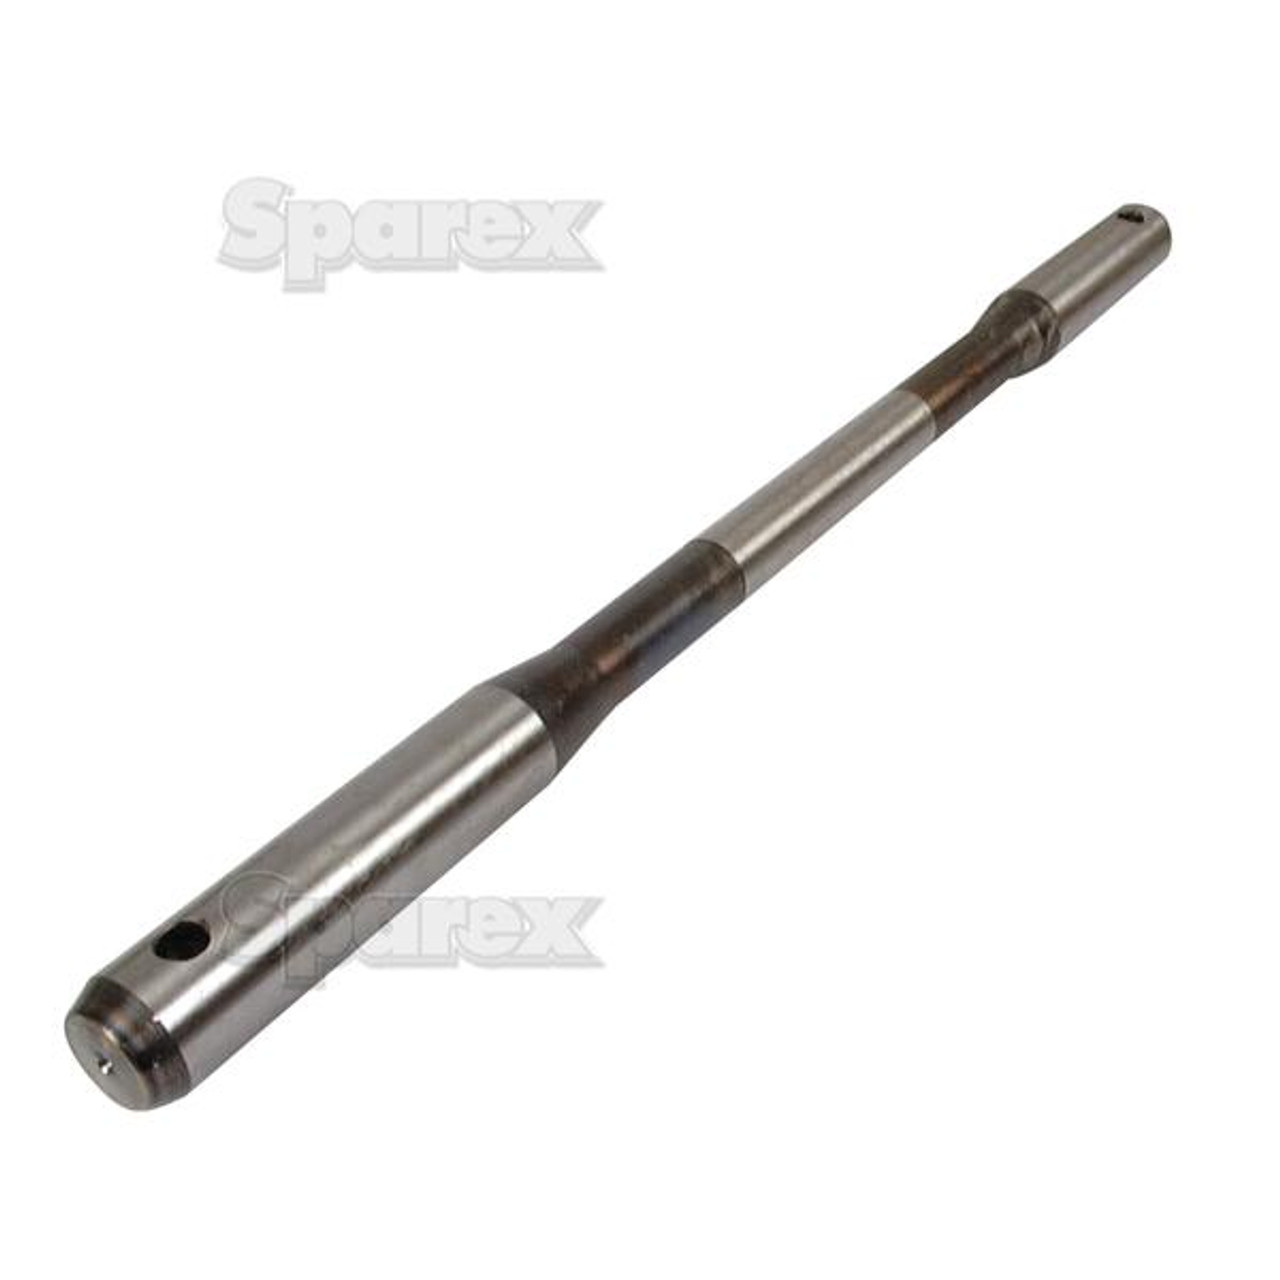 Tractor  SHAFT, HYDRAULIC, S-L41787 Part Number S72469